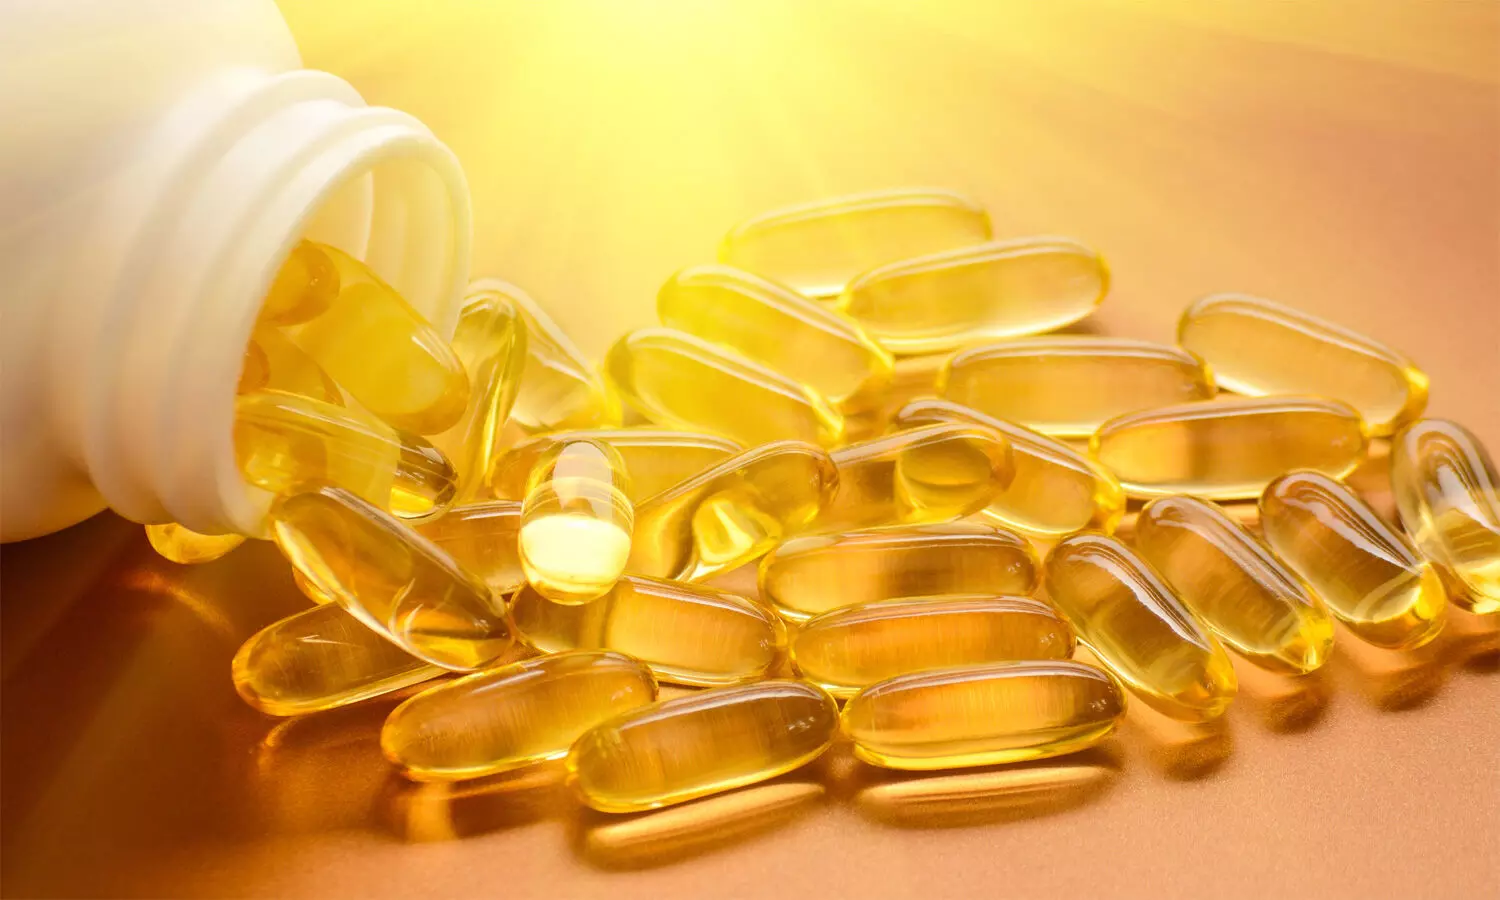 Study links low Vitamin D levels to high Covid 19 deaths